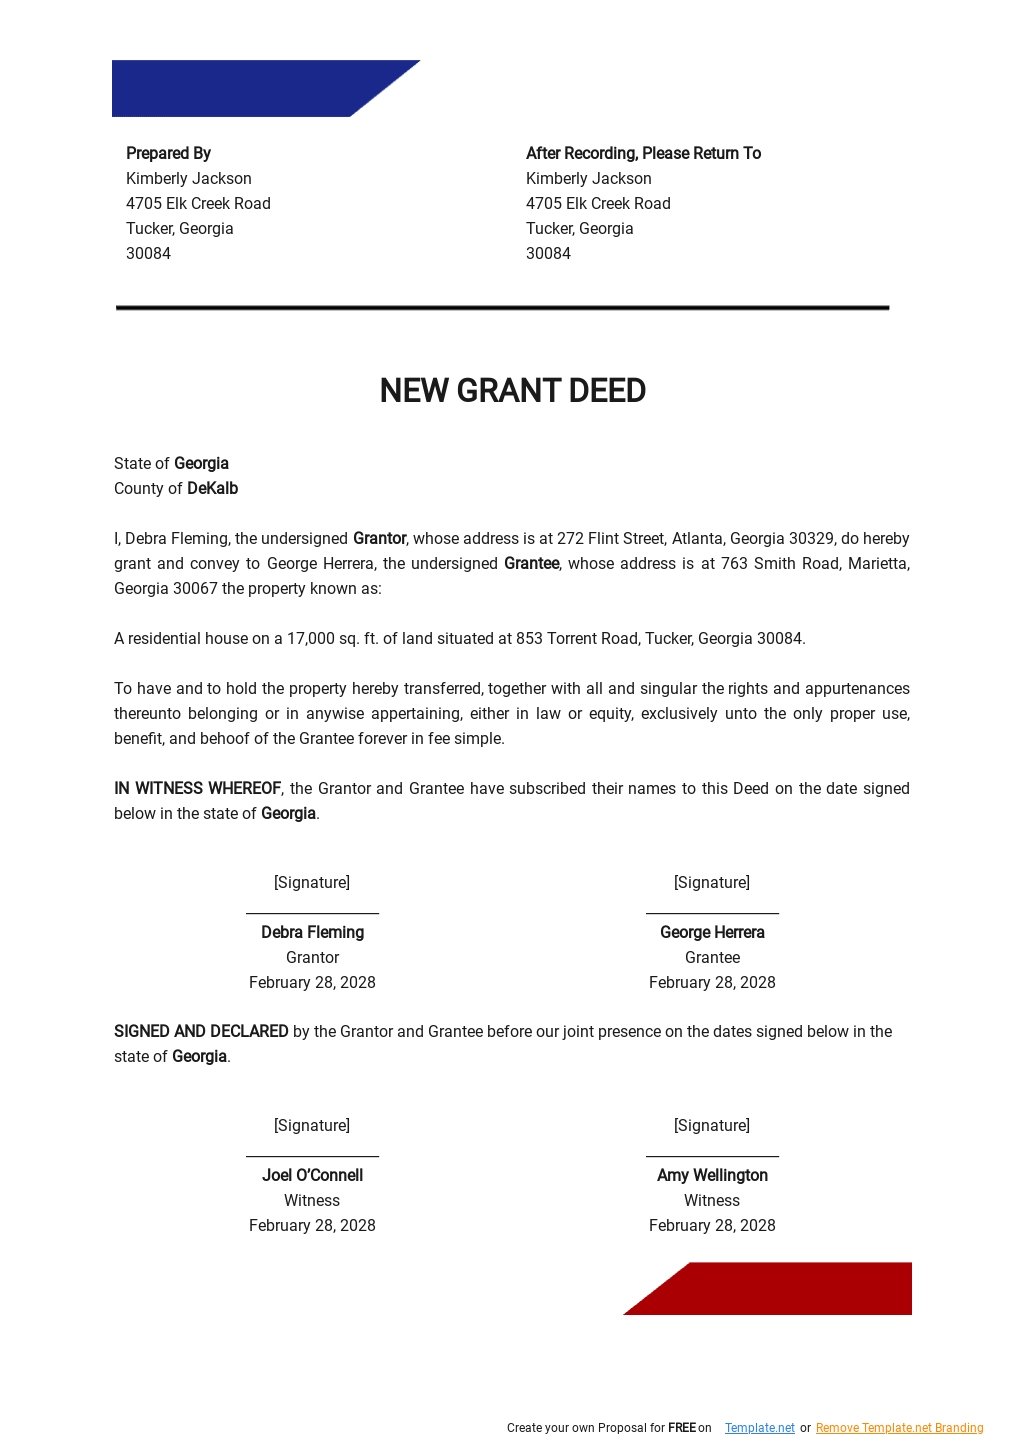 new-grant-deed-template